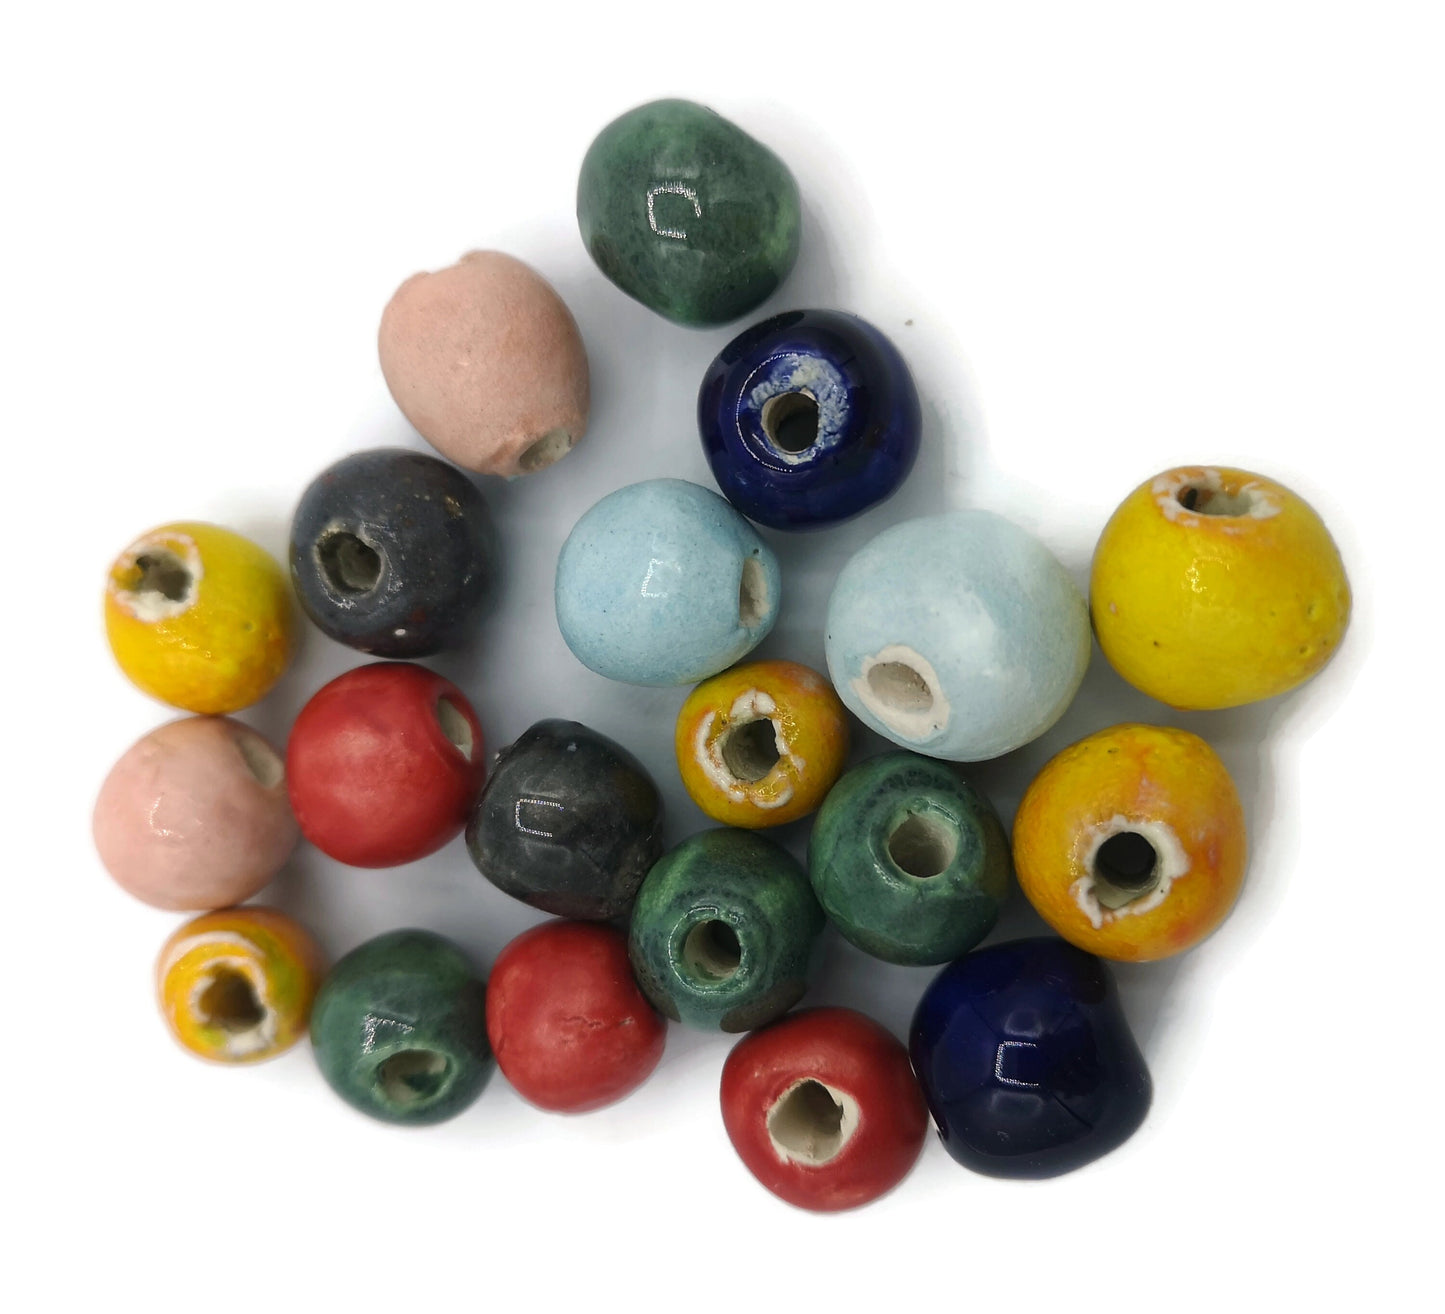 MIXED BEADS, UNIQUE Ceramic Beads, Bubblegum Beads, 20 Pcs Clay Craft Beads Decorative for Jewelry Making, Round Colorful Beads For Macrame - Ceramica Ana Rafael